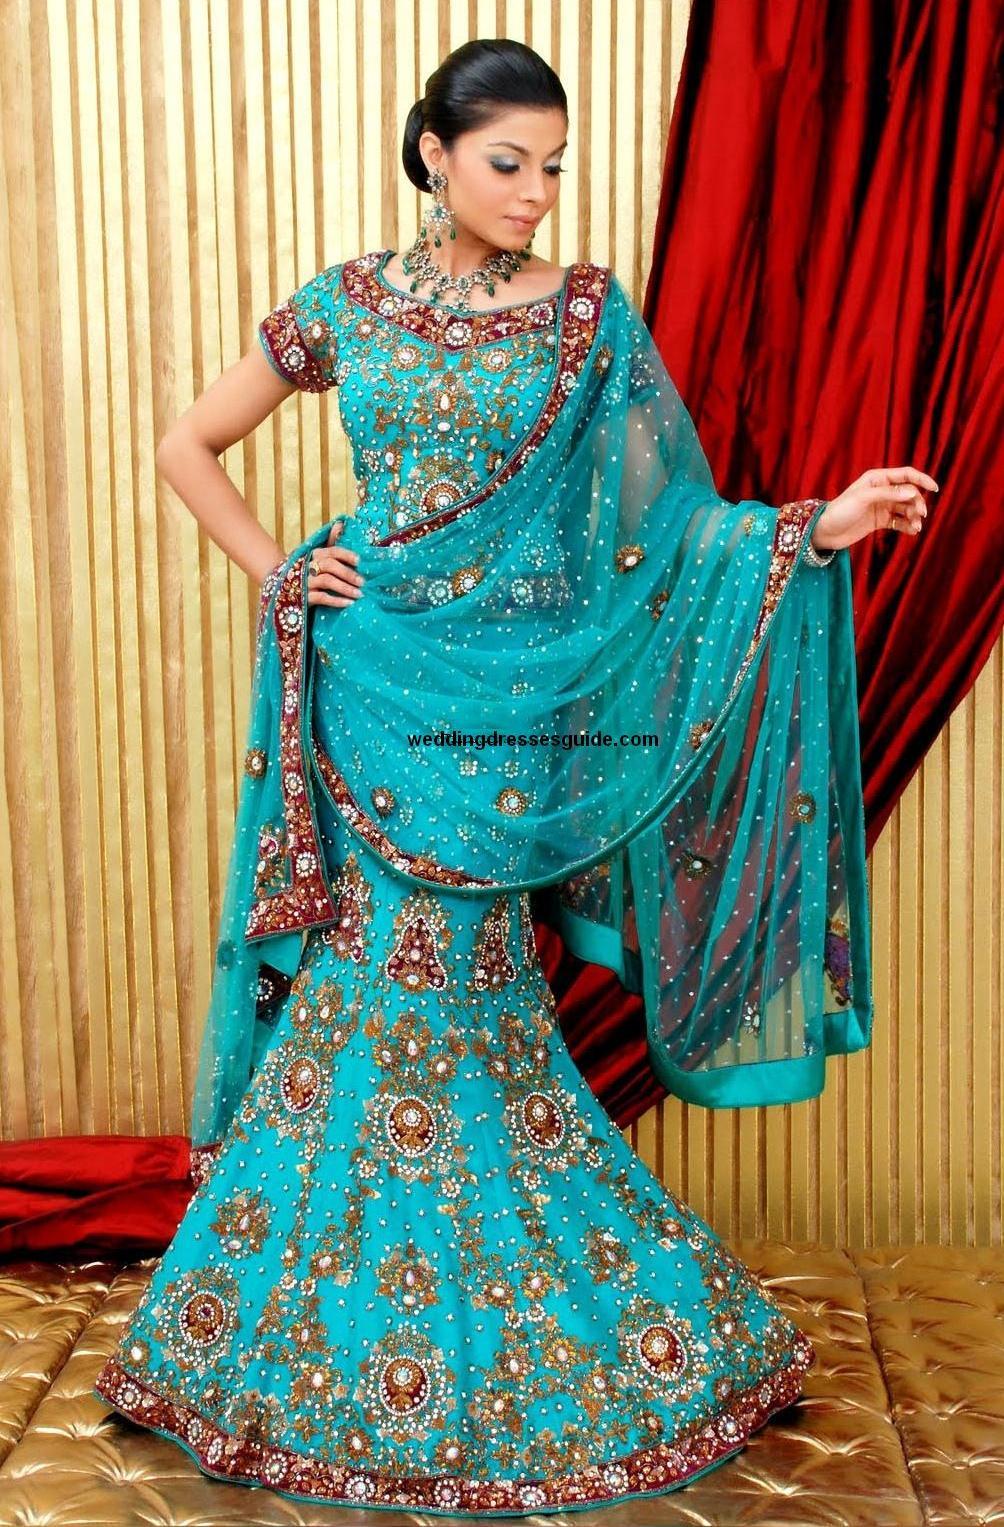 Amazing Pakistani Wedding Dresses 2012 in the world Learn more here 